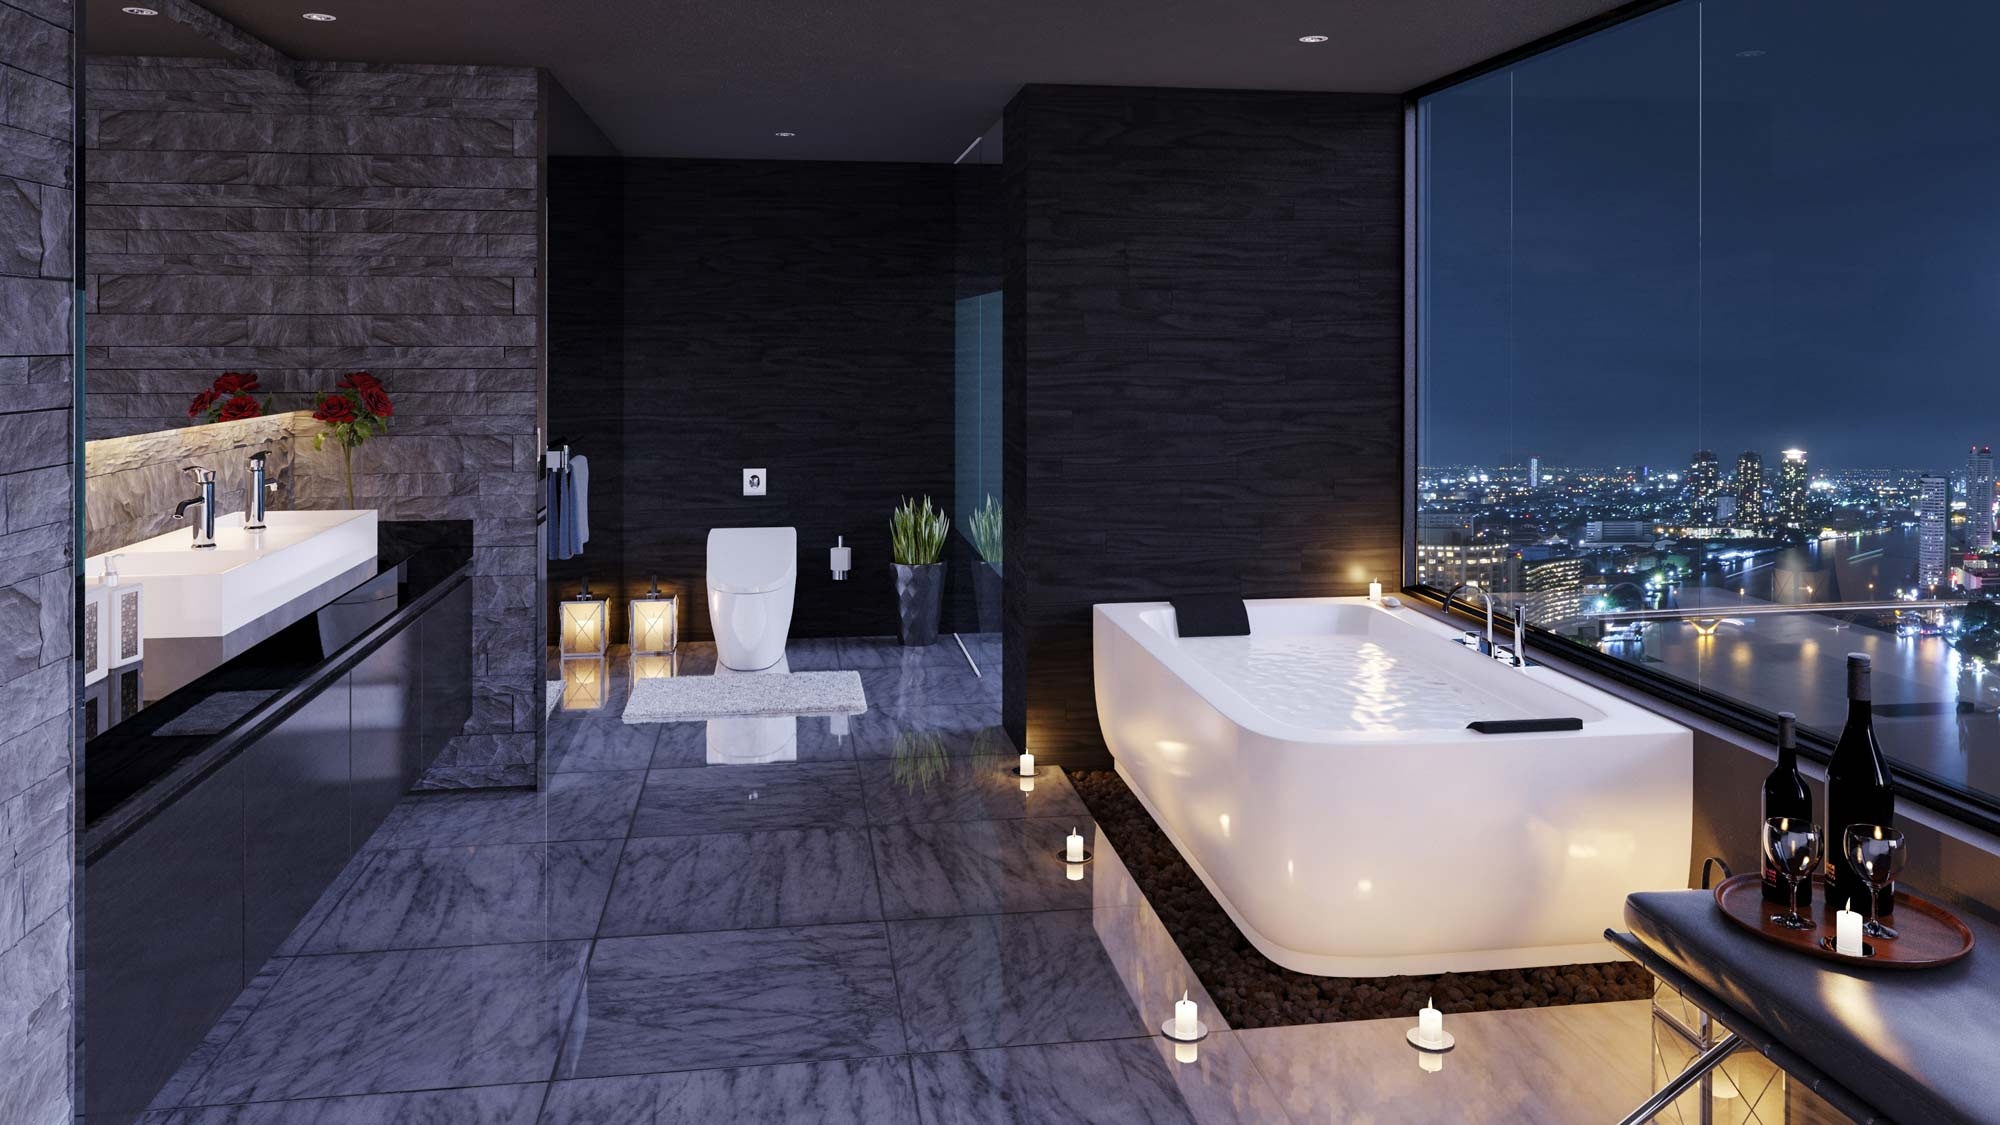 Luxury bathroom decor "width =" 2000 "height =" 1125 "srcset =" https://mileray.com/wp-content/uploads/2020/05/1588515207_476_Luxury-Bathroom-Decor-With-Beautiful-and-Trendy-Design-Which-Looks.jpeg 2000w, https: //mileray.com/wp-content/uploads/2016/09/urban-bathroom-design-Valkyrie-Studio-300x169.jpeg 300w, https://mileray.com/wp-content/uploads/2016/09/urban -bathroom-design-Valkyrie-Studio-768x432.jpeg 768w, https://mileray.com/wp-content/uploads/2016/09/urban-bathroom-design-Valkyrie-Studio-1024x576.jpeg 1024w, https: / /mileray.com/wp-content/uploads/2016/09/urban-bathroom-design-Valkyrie-Studio-696x392.jpeg 696w, https://mileray.com/wp-content/uploads/2016/09/urban- Bathroom-Design-Valkyrie-Studio-1068x601.jpeg 1068w, https://mileray.com/wp-content/uploads/2016/09/urban-bathroom-design-Valkyrie-Studio-747x420.jpeg 747w "sizes =" ( maximum width: 2000px) 100vw, 2000px